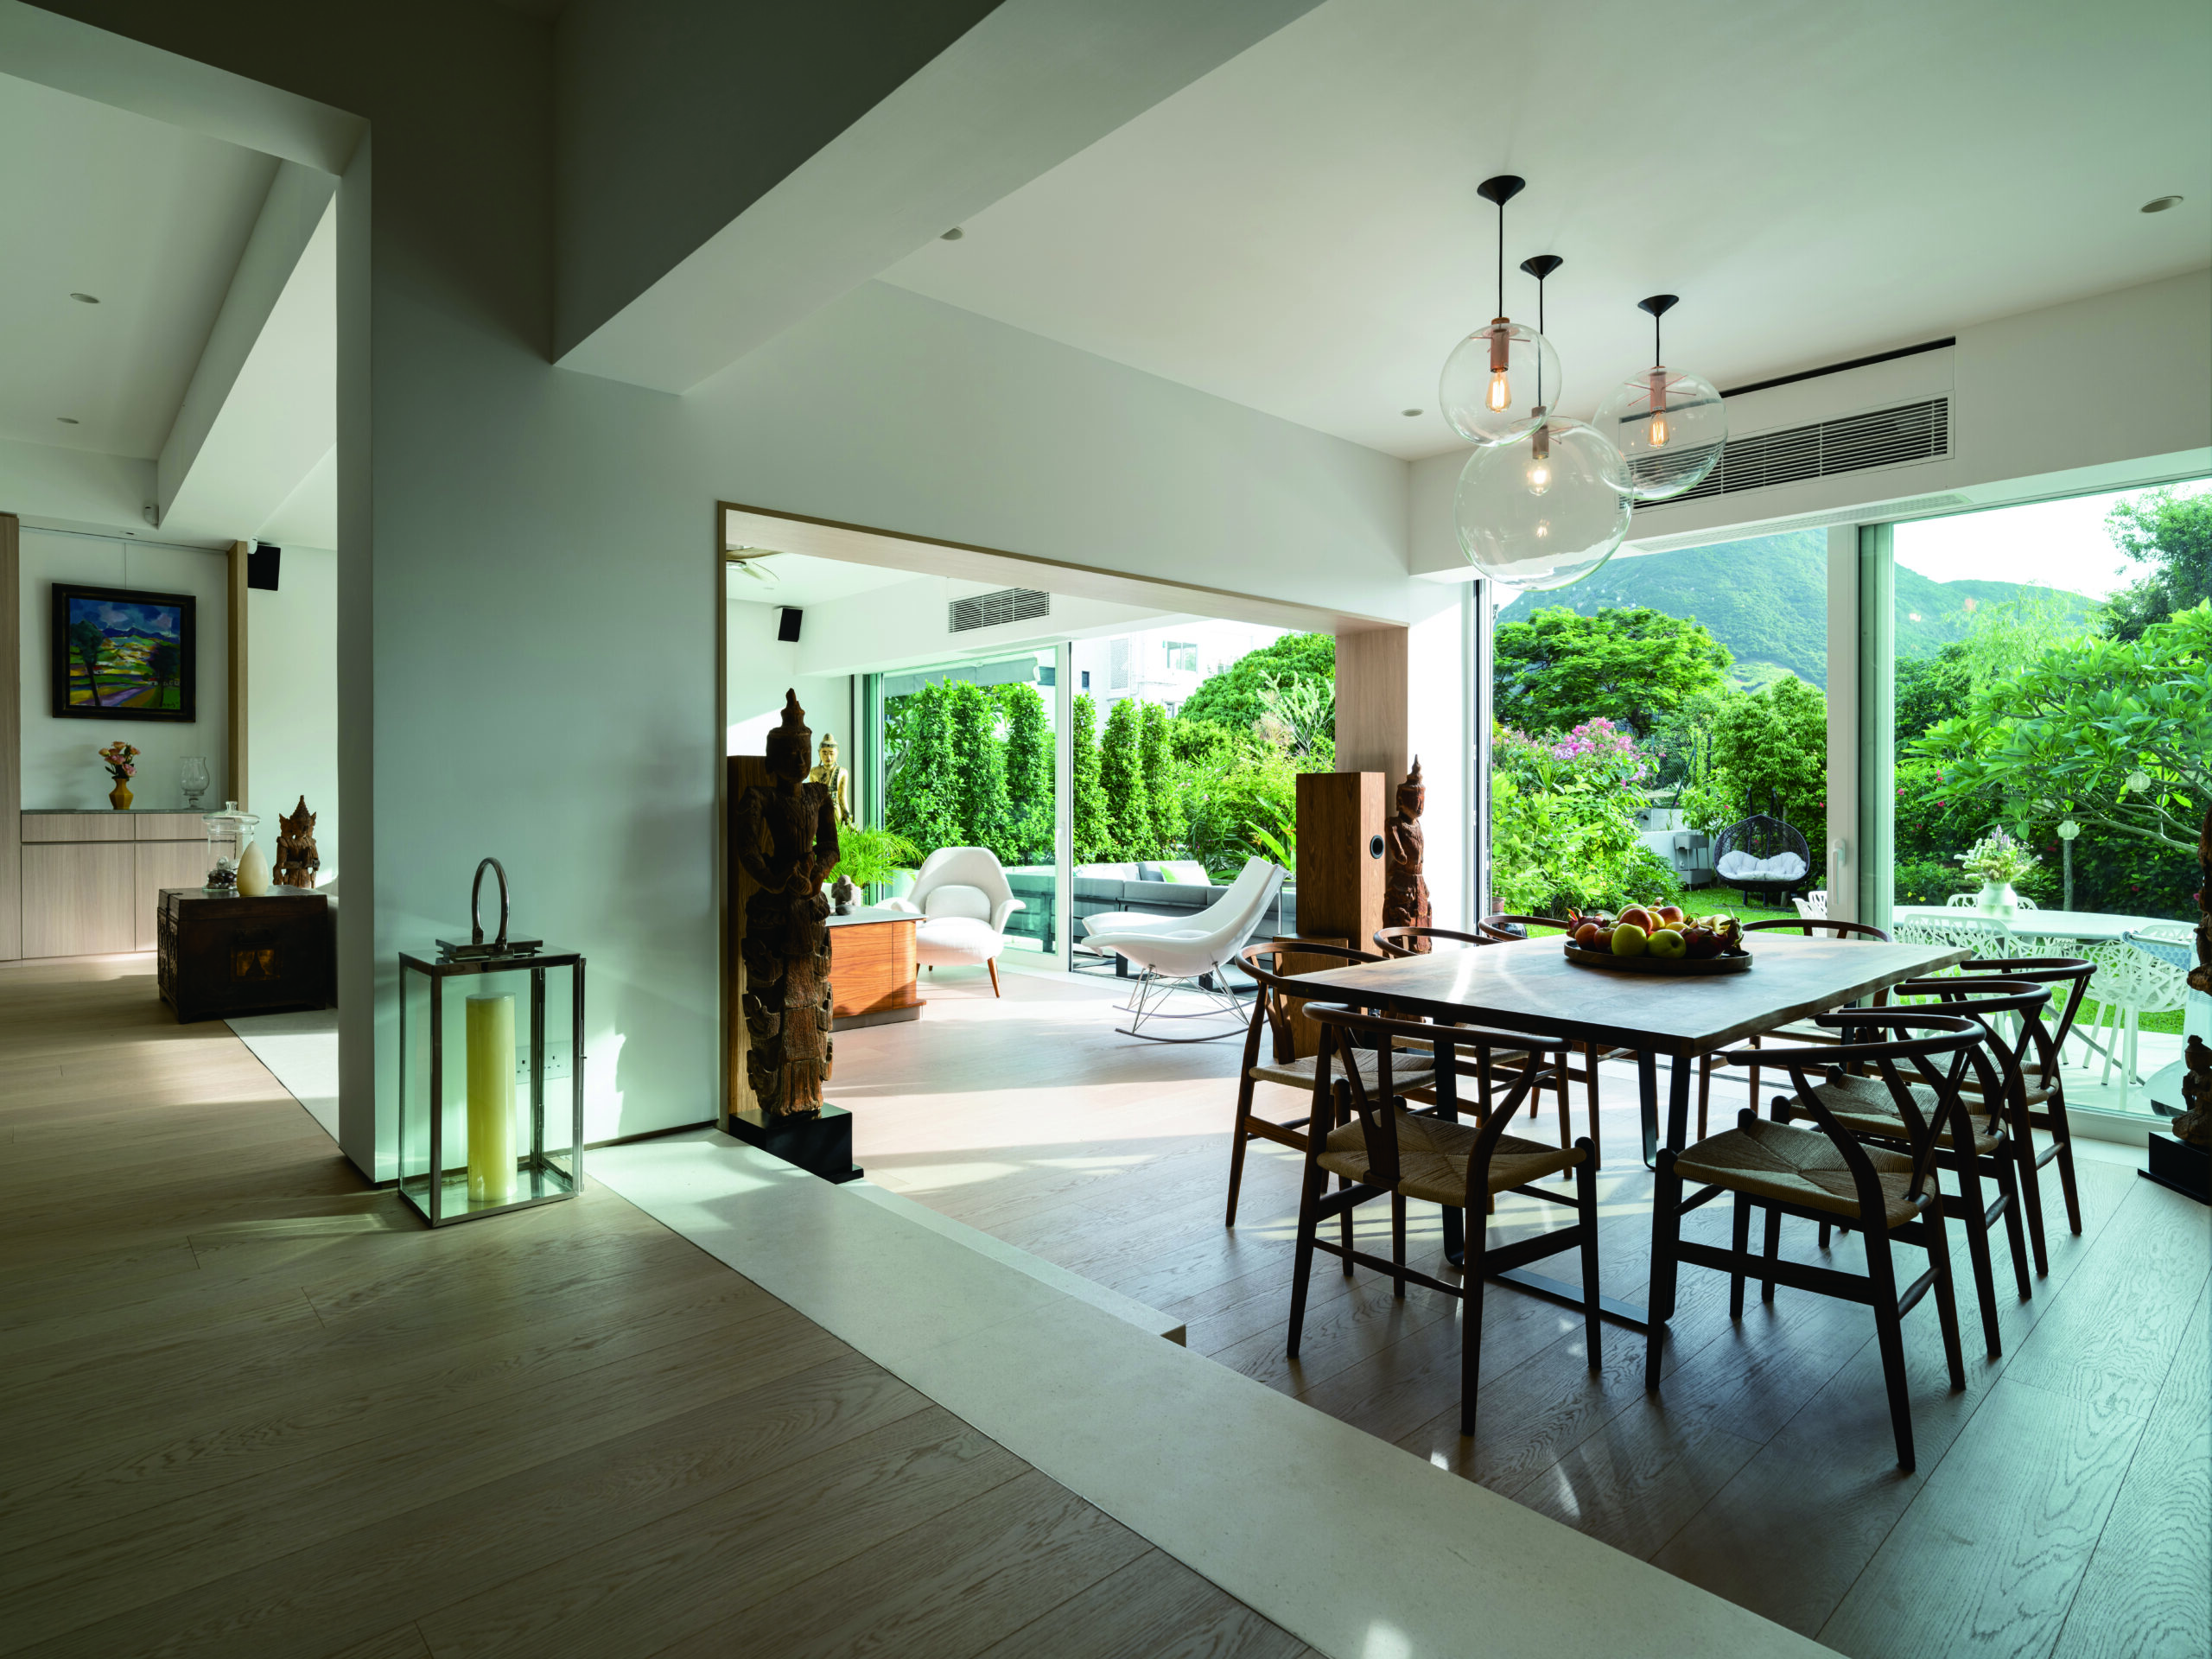 Sanctuary Synergy- A residential retreat on the south side of Hong Kong Island